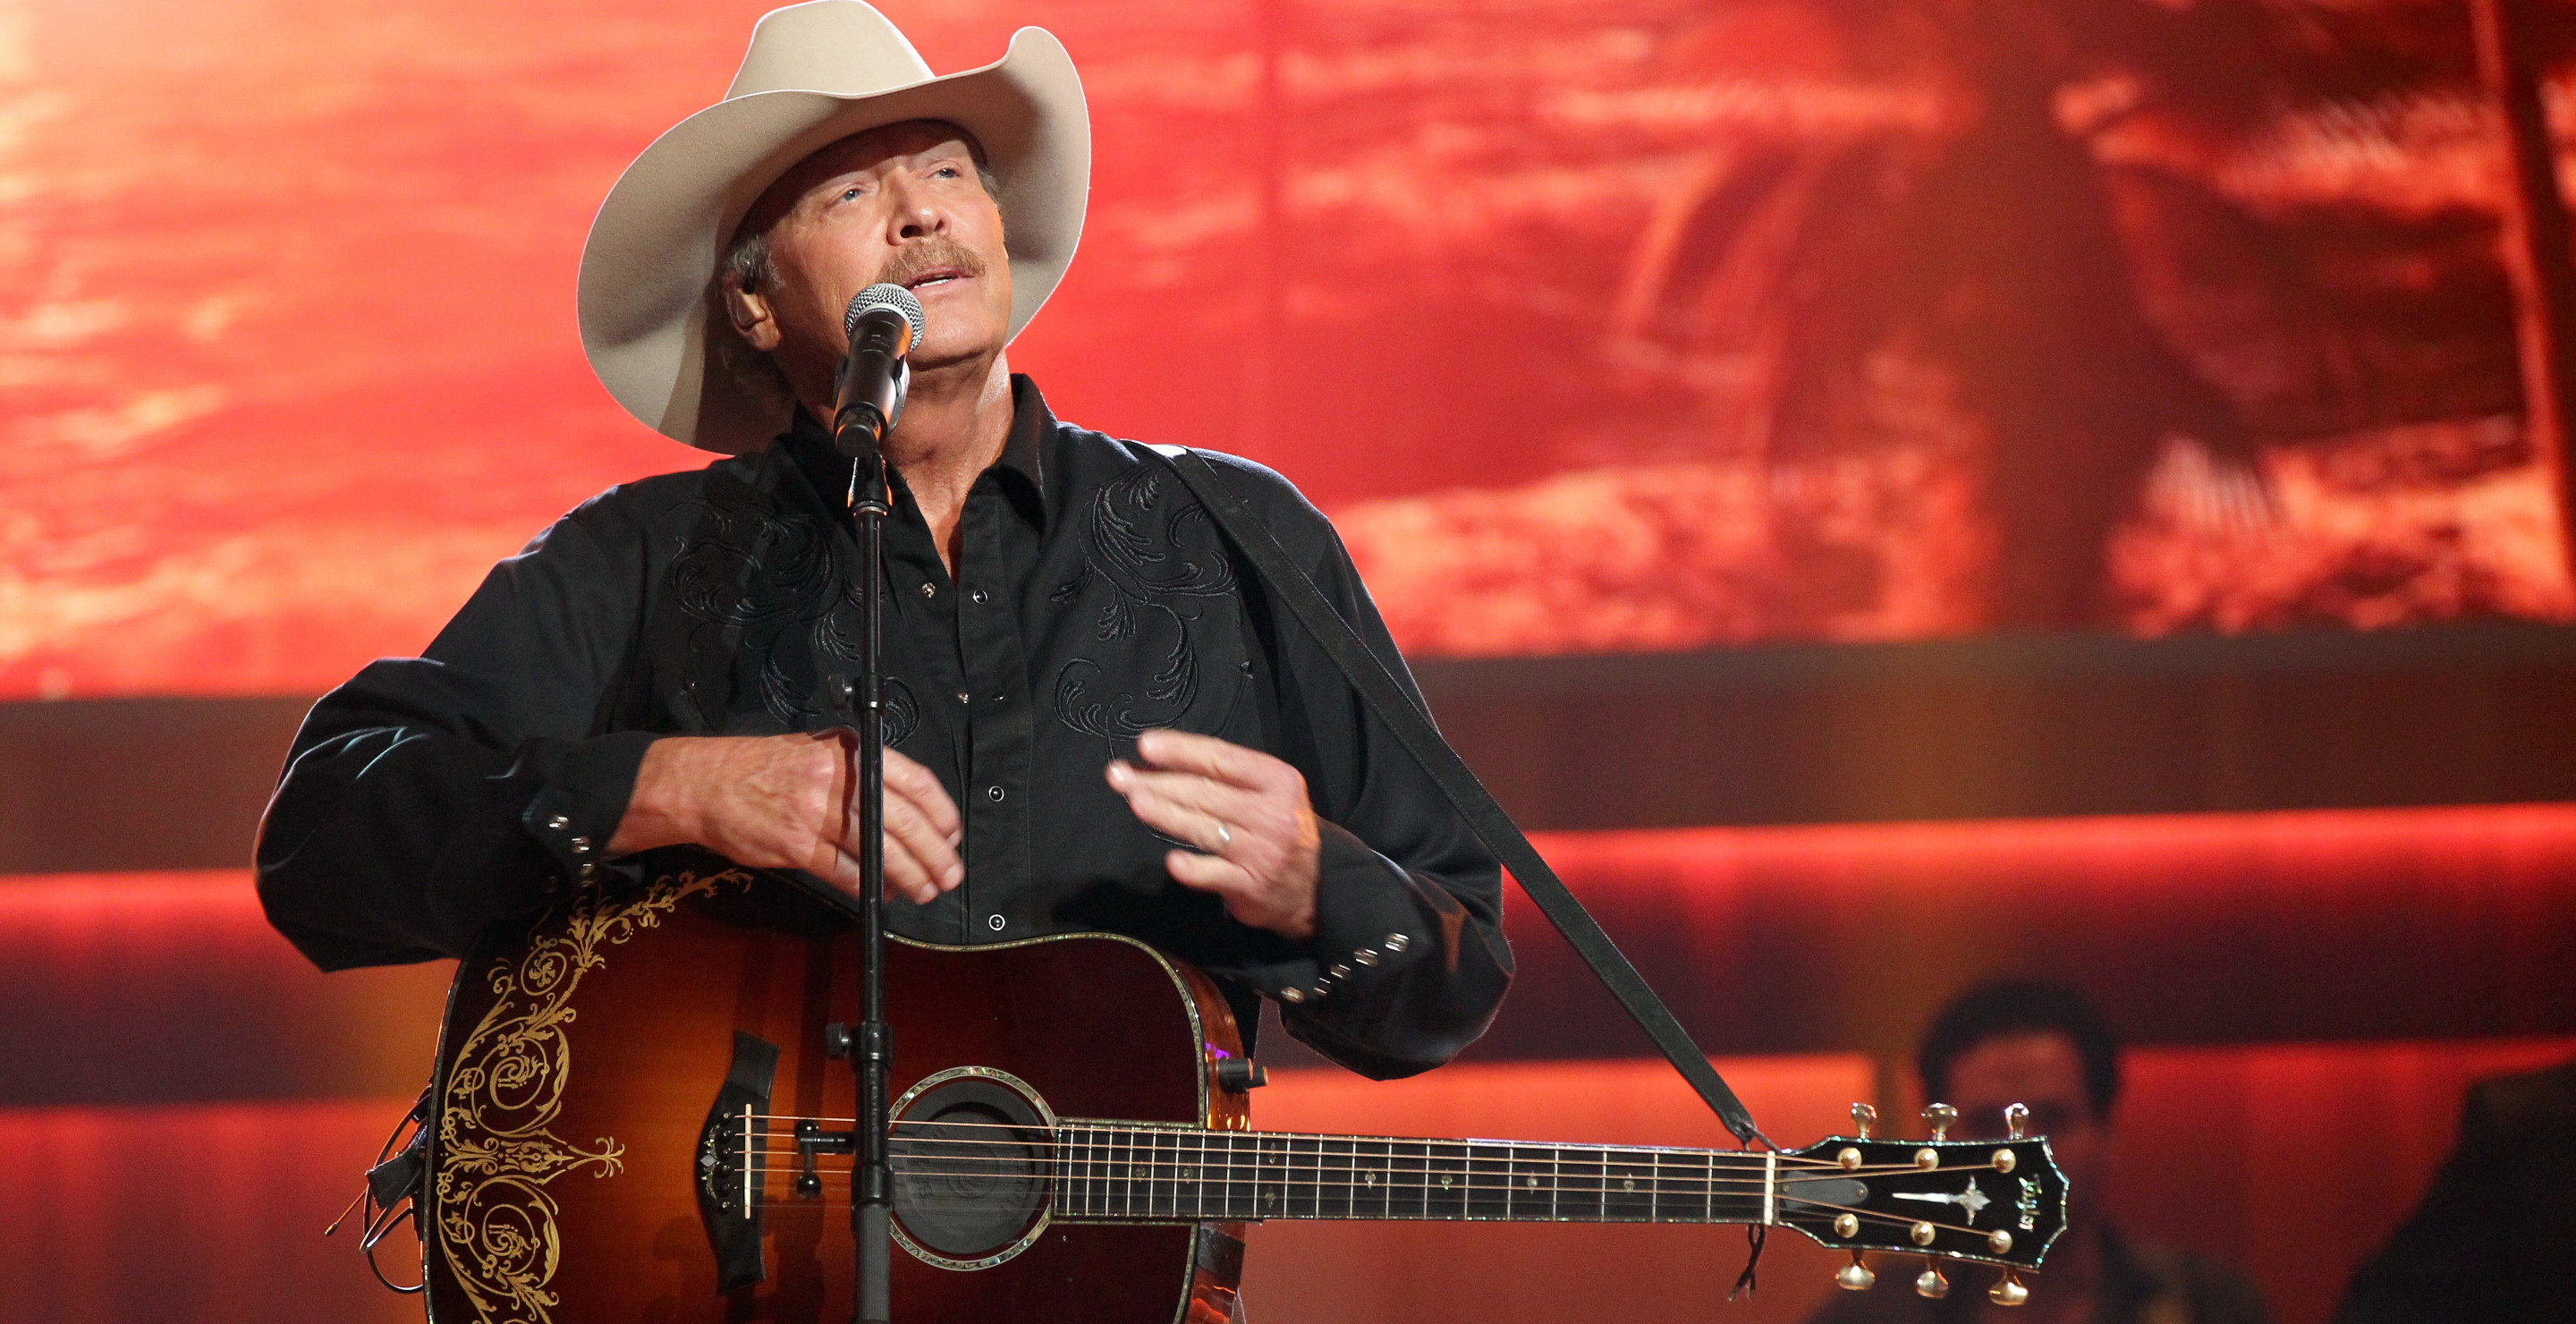 What Is Charcot-Marie-Tooth Disease? A Look at Alan Jackson’s Health Battle In His Own Words